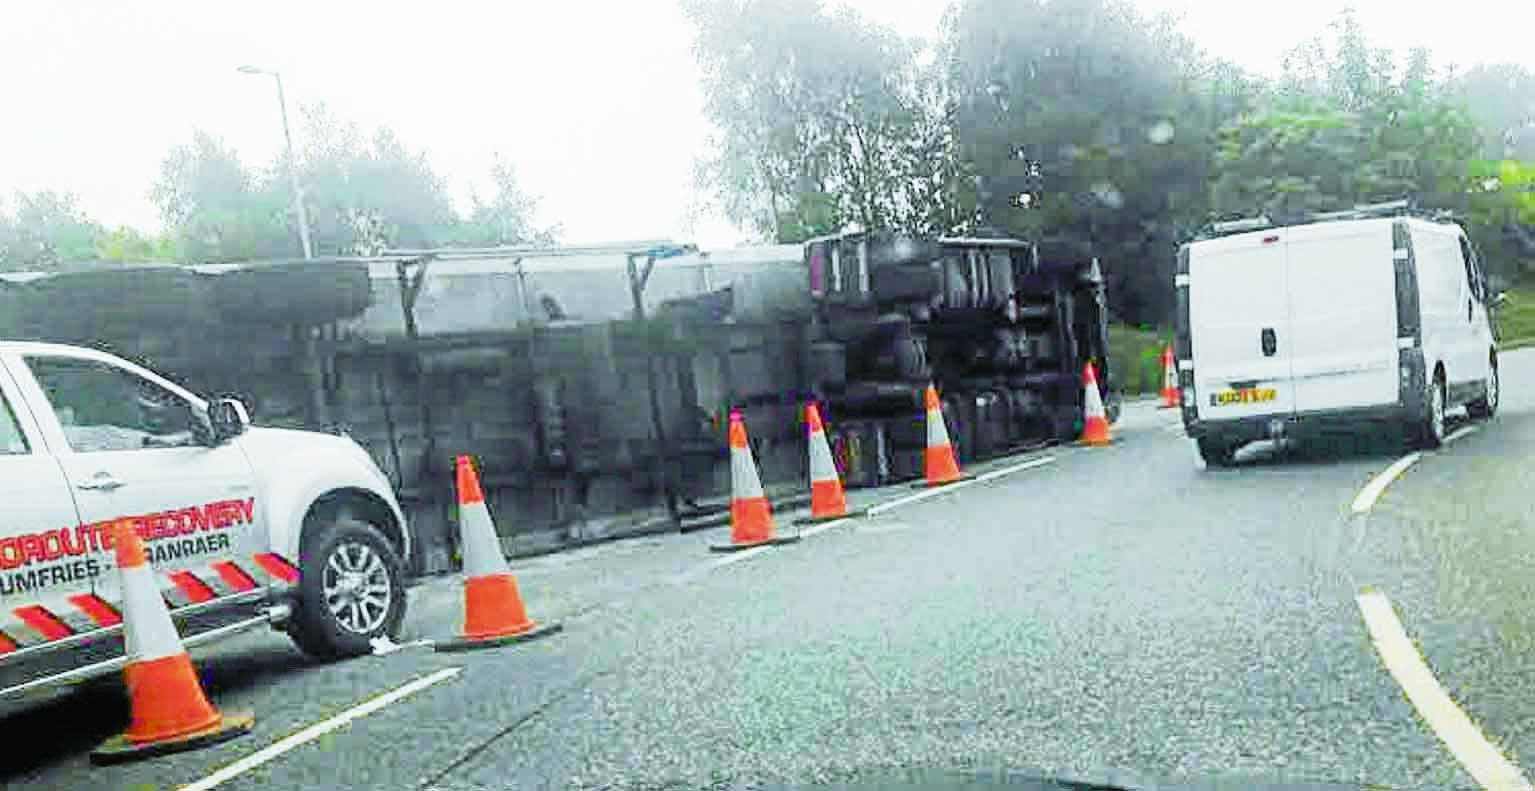 Dumfries by-pass delays after lorry crash